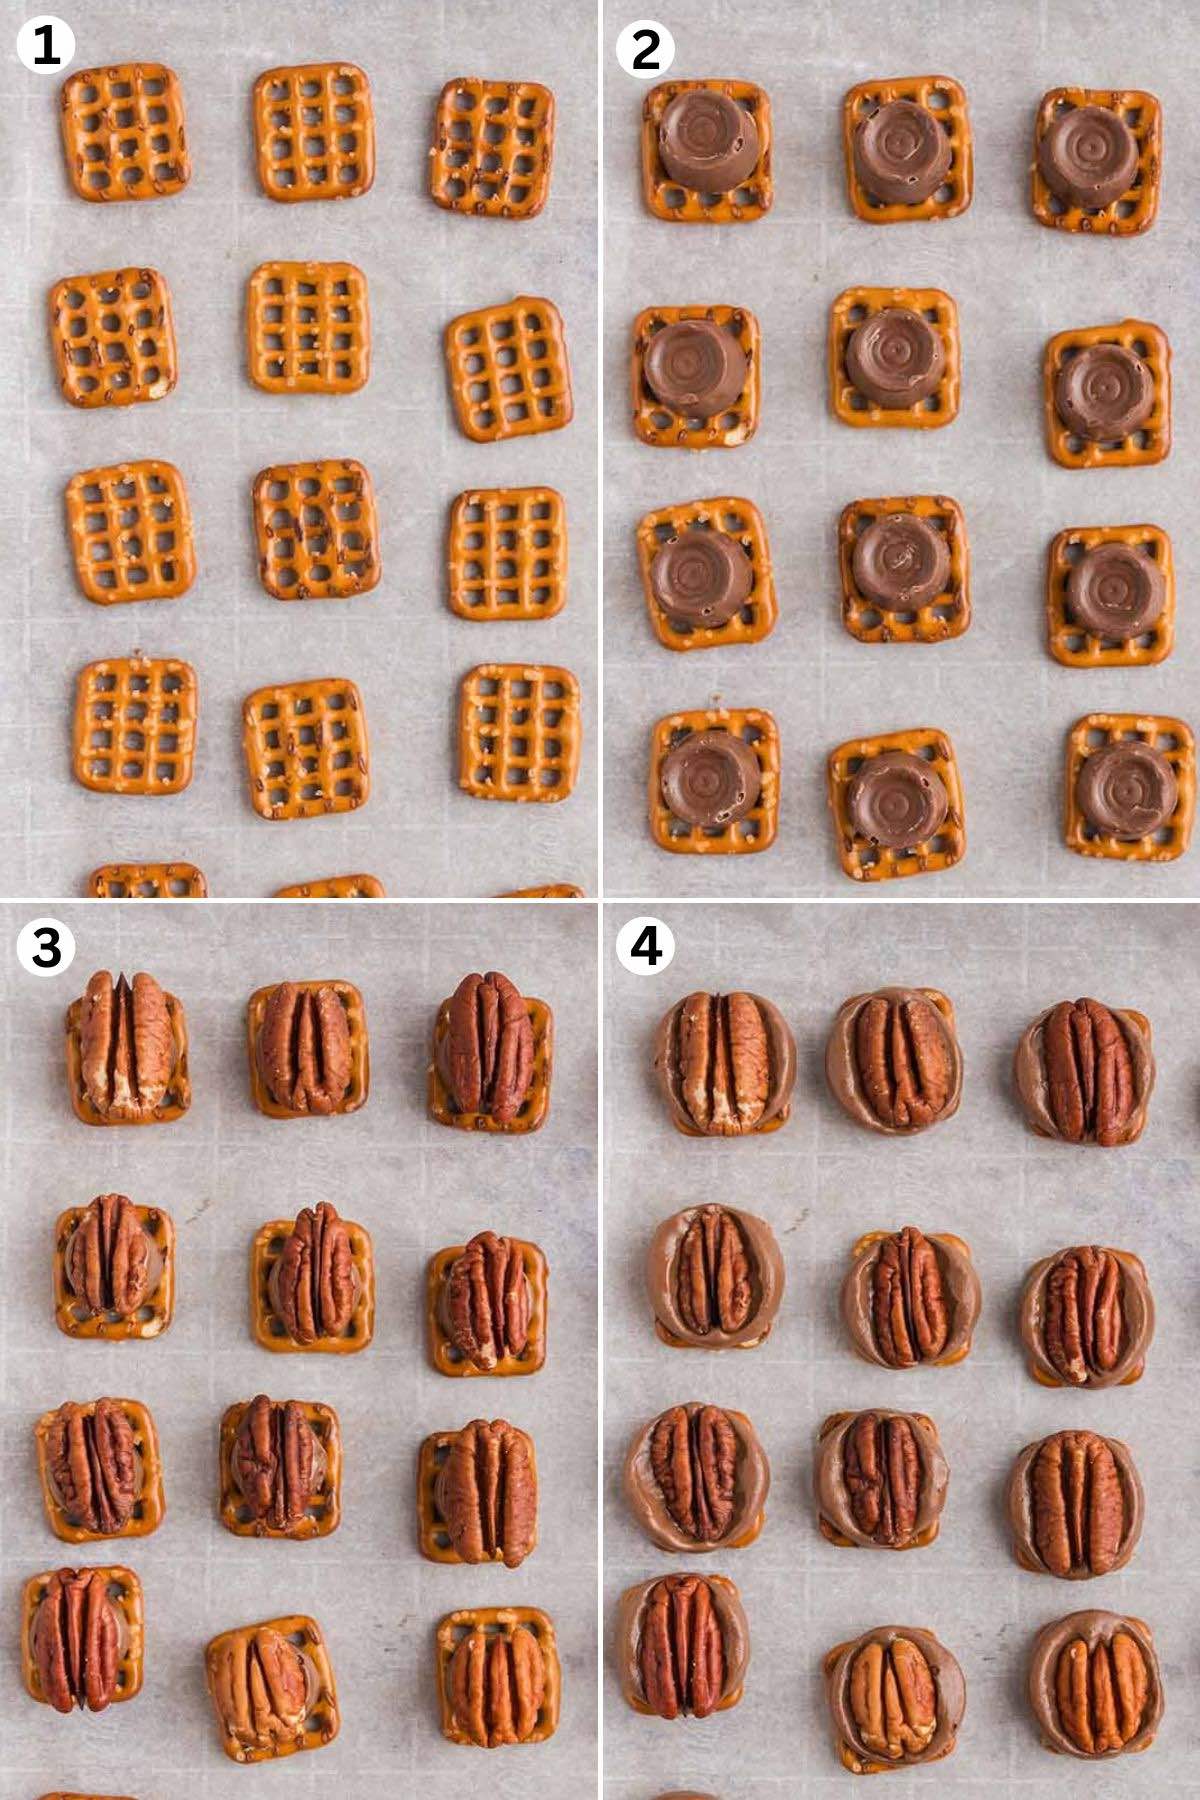 Arrange the pretzels in baking sheet. Place the rolos on top of each pretzels. Place the pecan on top and bake.